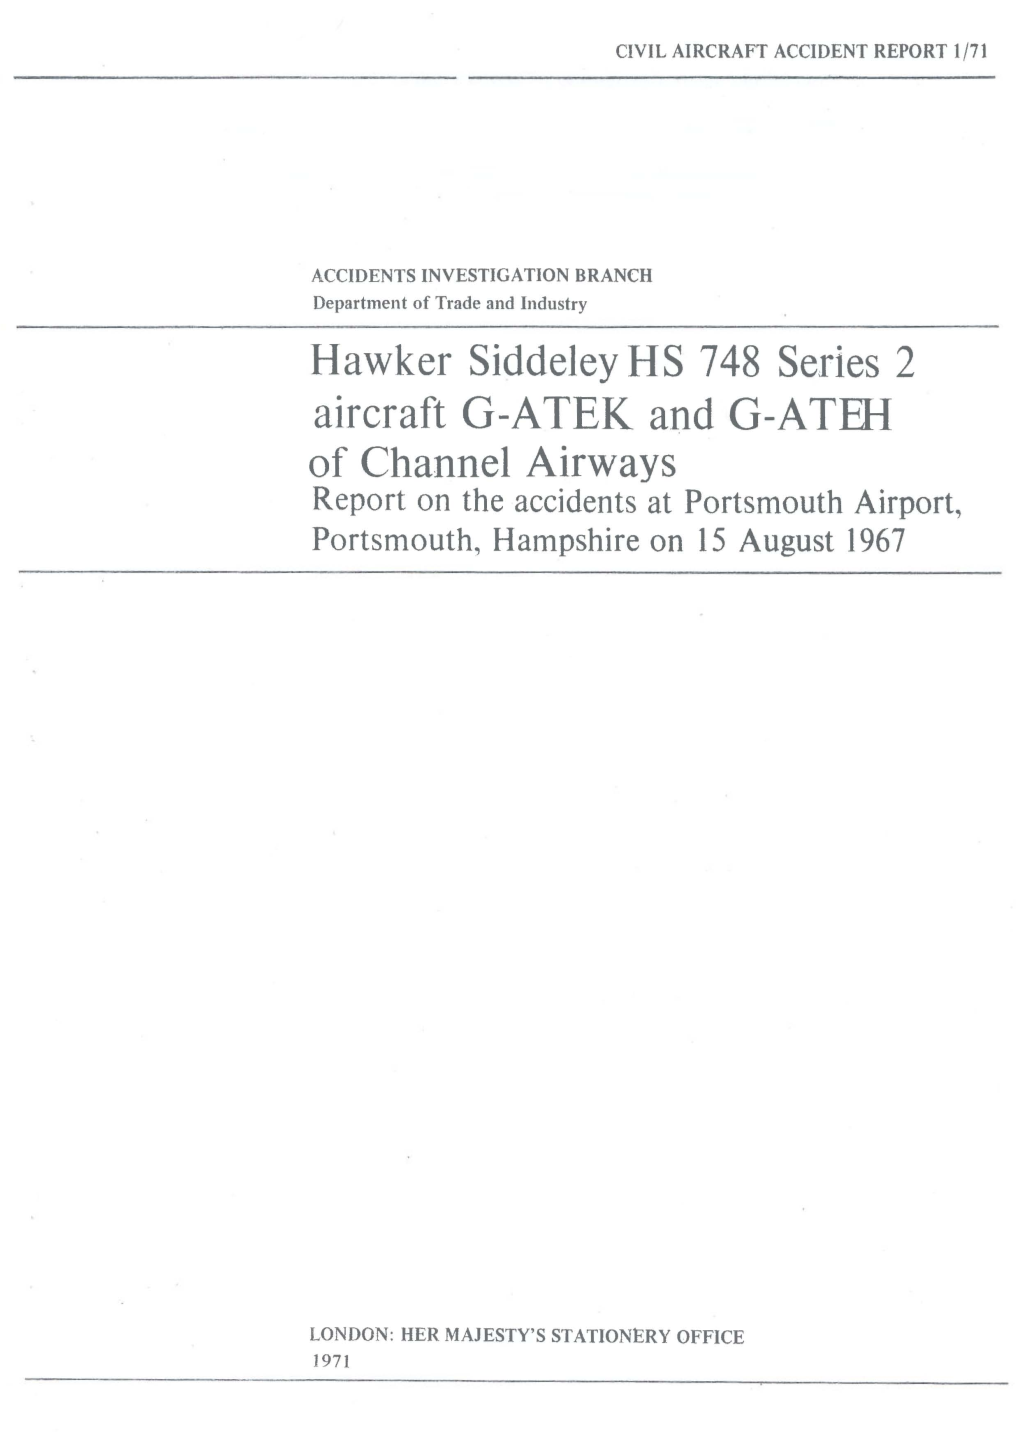 Hawker Siddeley HS 748 Series 2 Aircraft G-ATEK and G-ATEH of Channel Airways Report on the Accidents at Portsmouth Airport, Portsmouth~ Hampshire on 15 August 1967